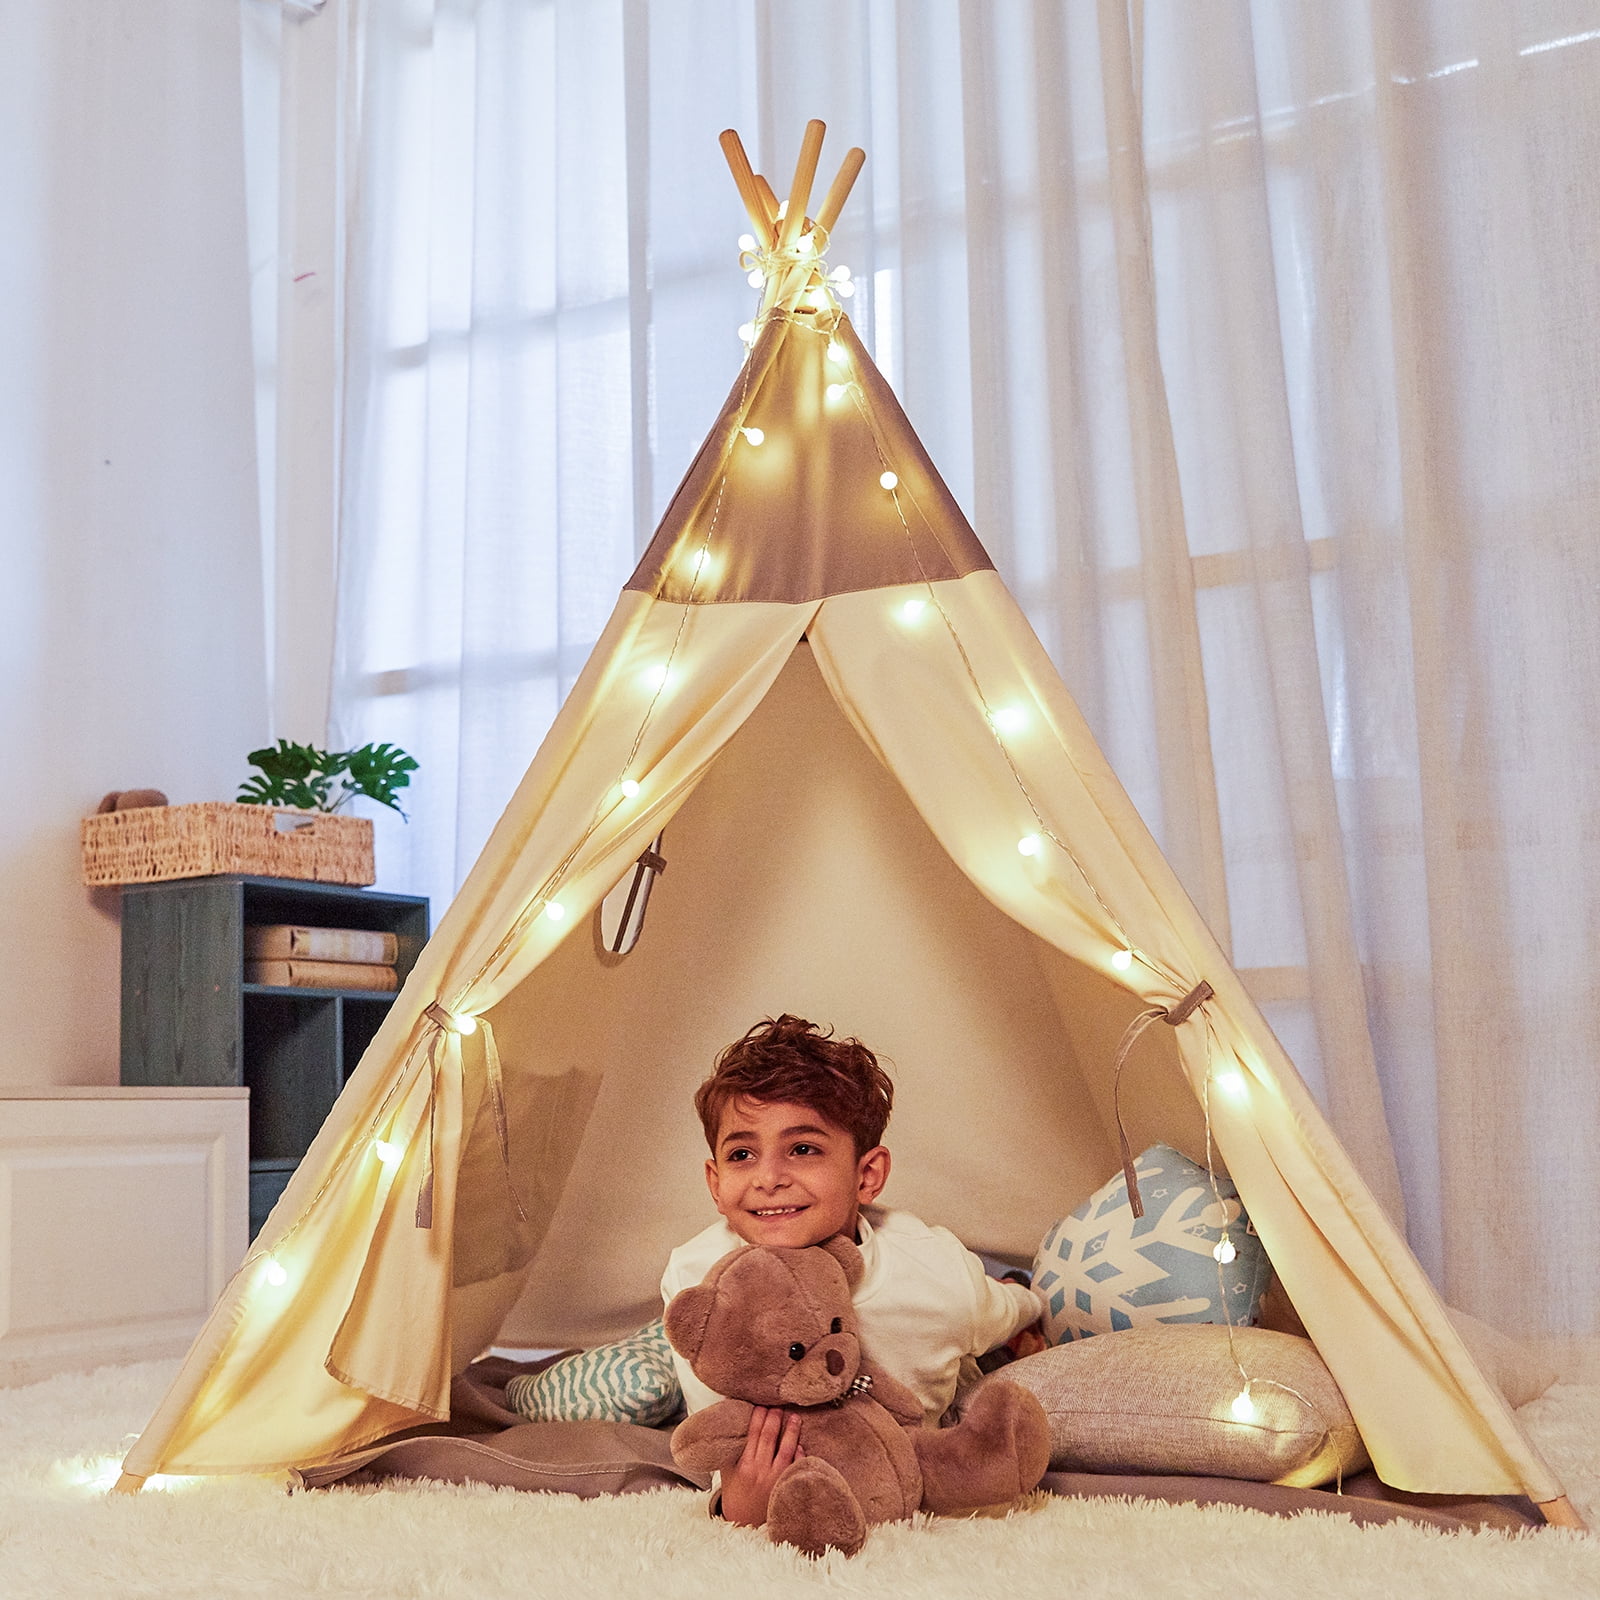 Indian Pink Lace Play Tent Teepee Kids Children Indoor Playhouse Sleeping Dome 